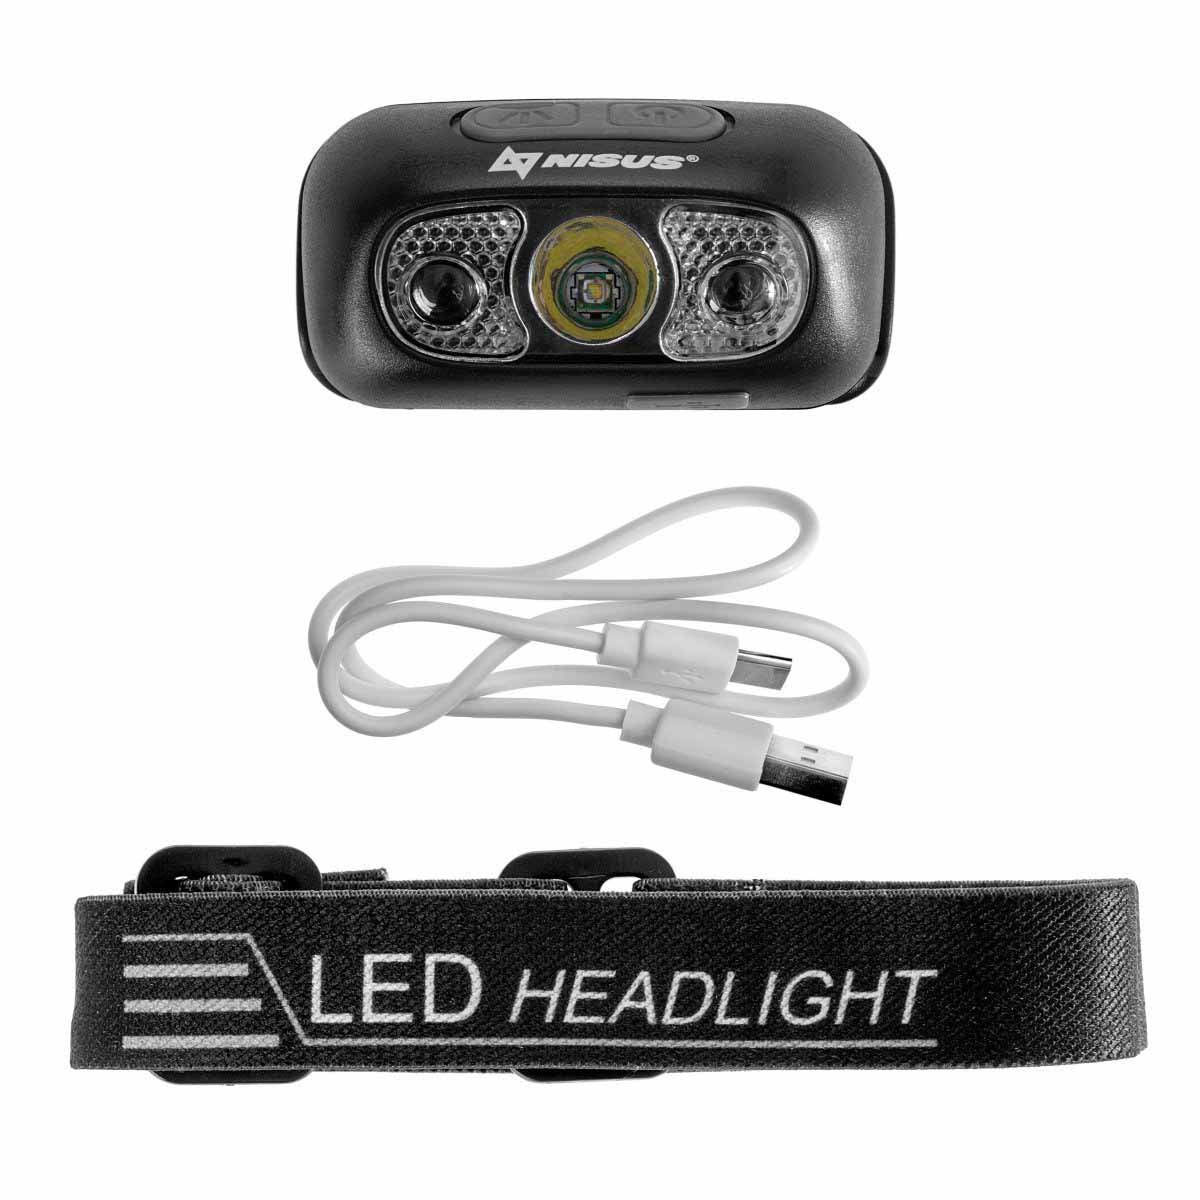 USB Rechargeable Smart Sensor Mode Water-Resistant Headlamp consists of a rechargeable flashlight, heandand and a USB cable